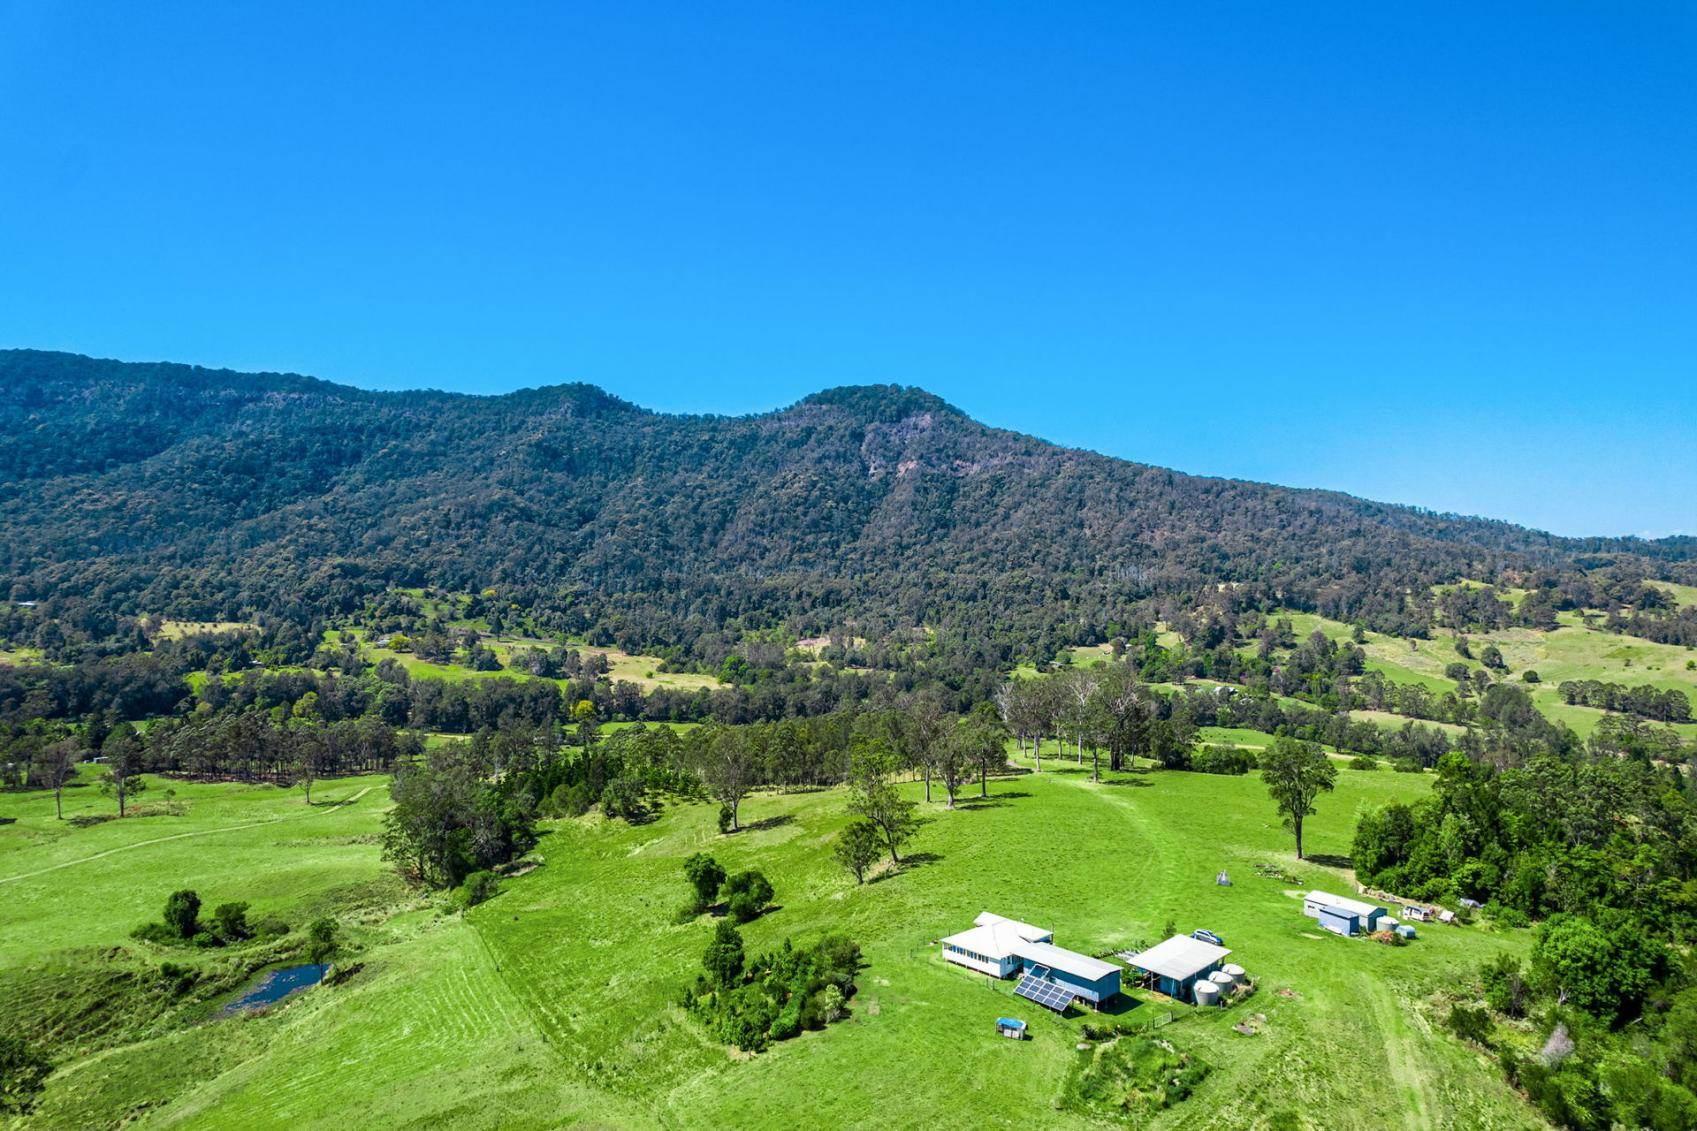 Affordable Rural Properties For Sale Northern Rivers NSW